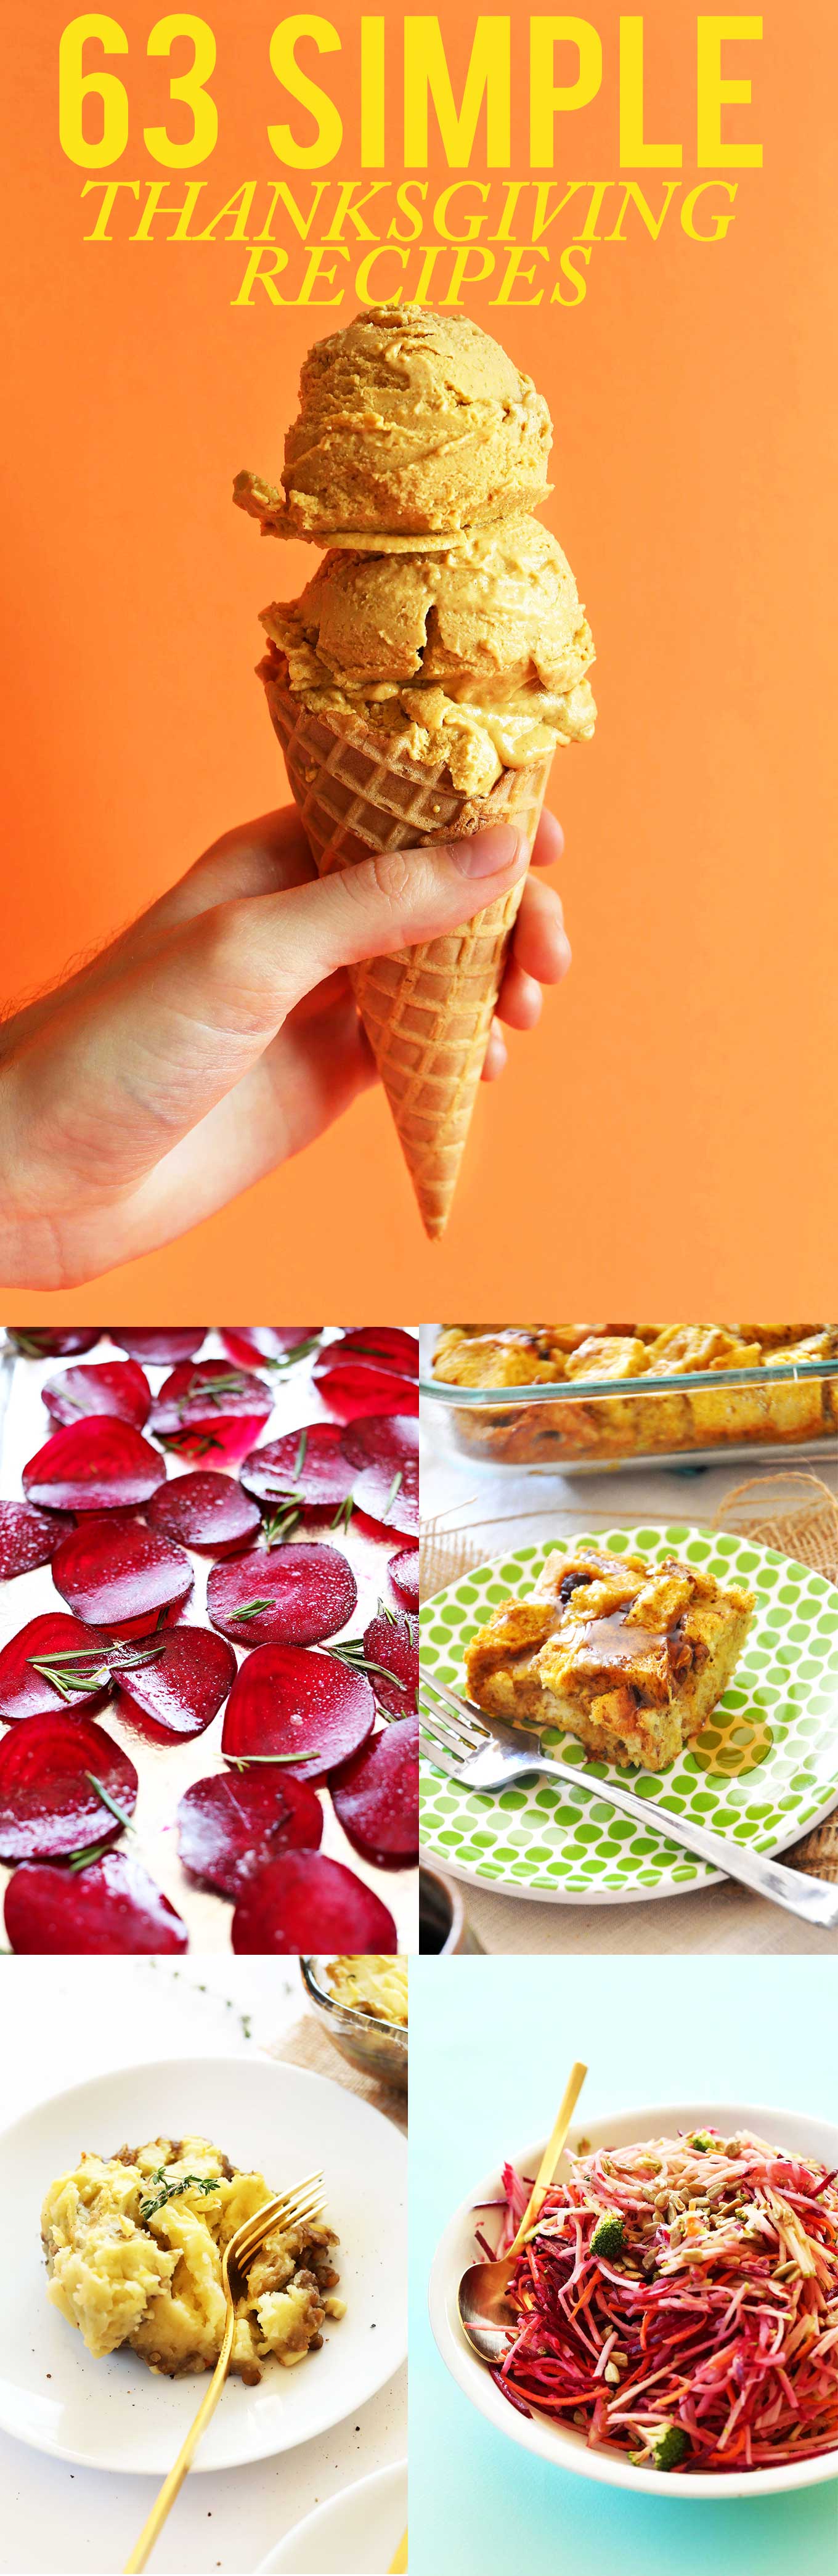 Collage of photos featuring simple Thanksgiving recipes